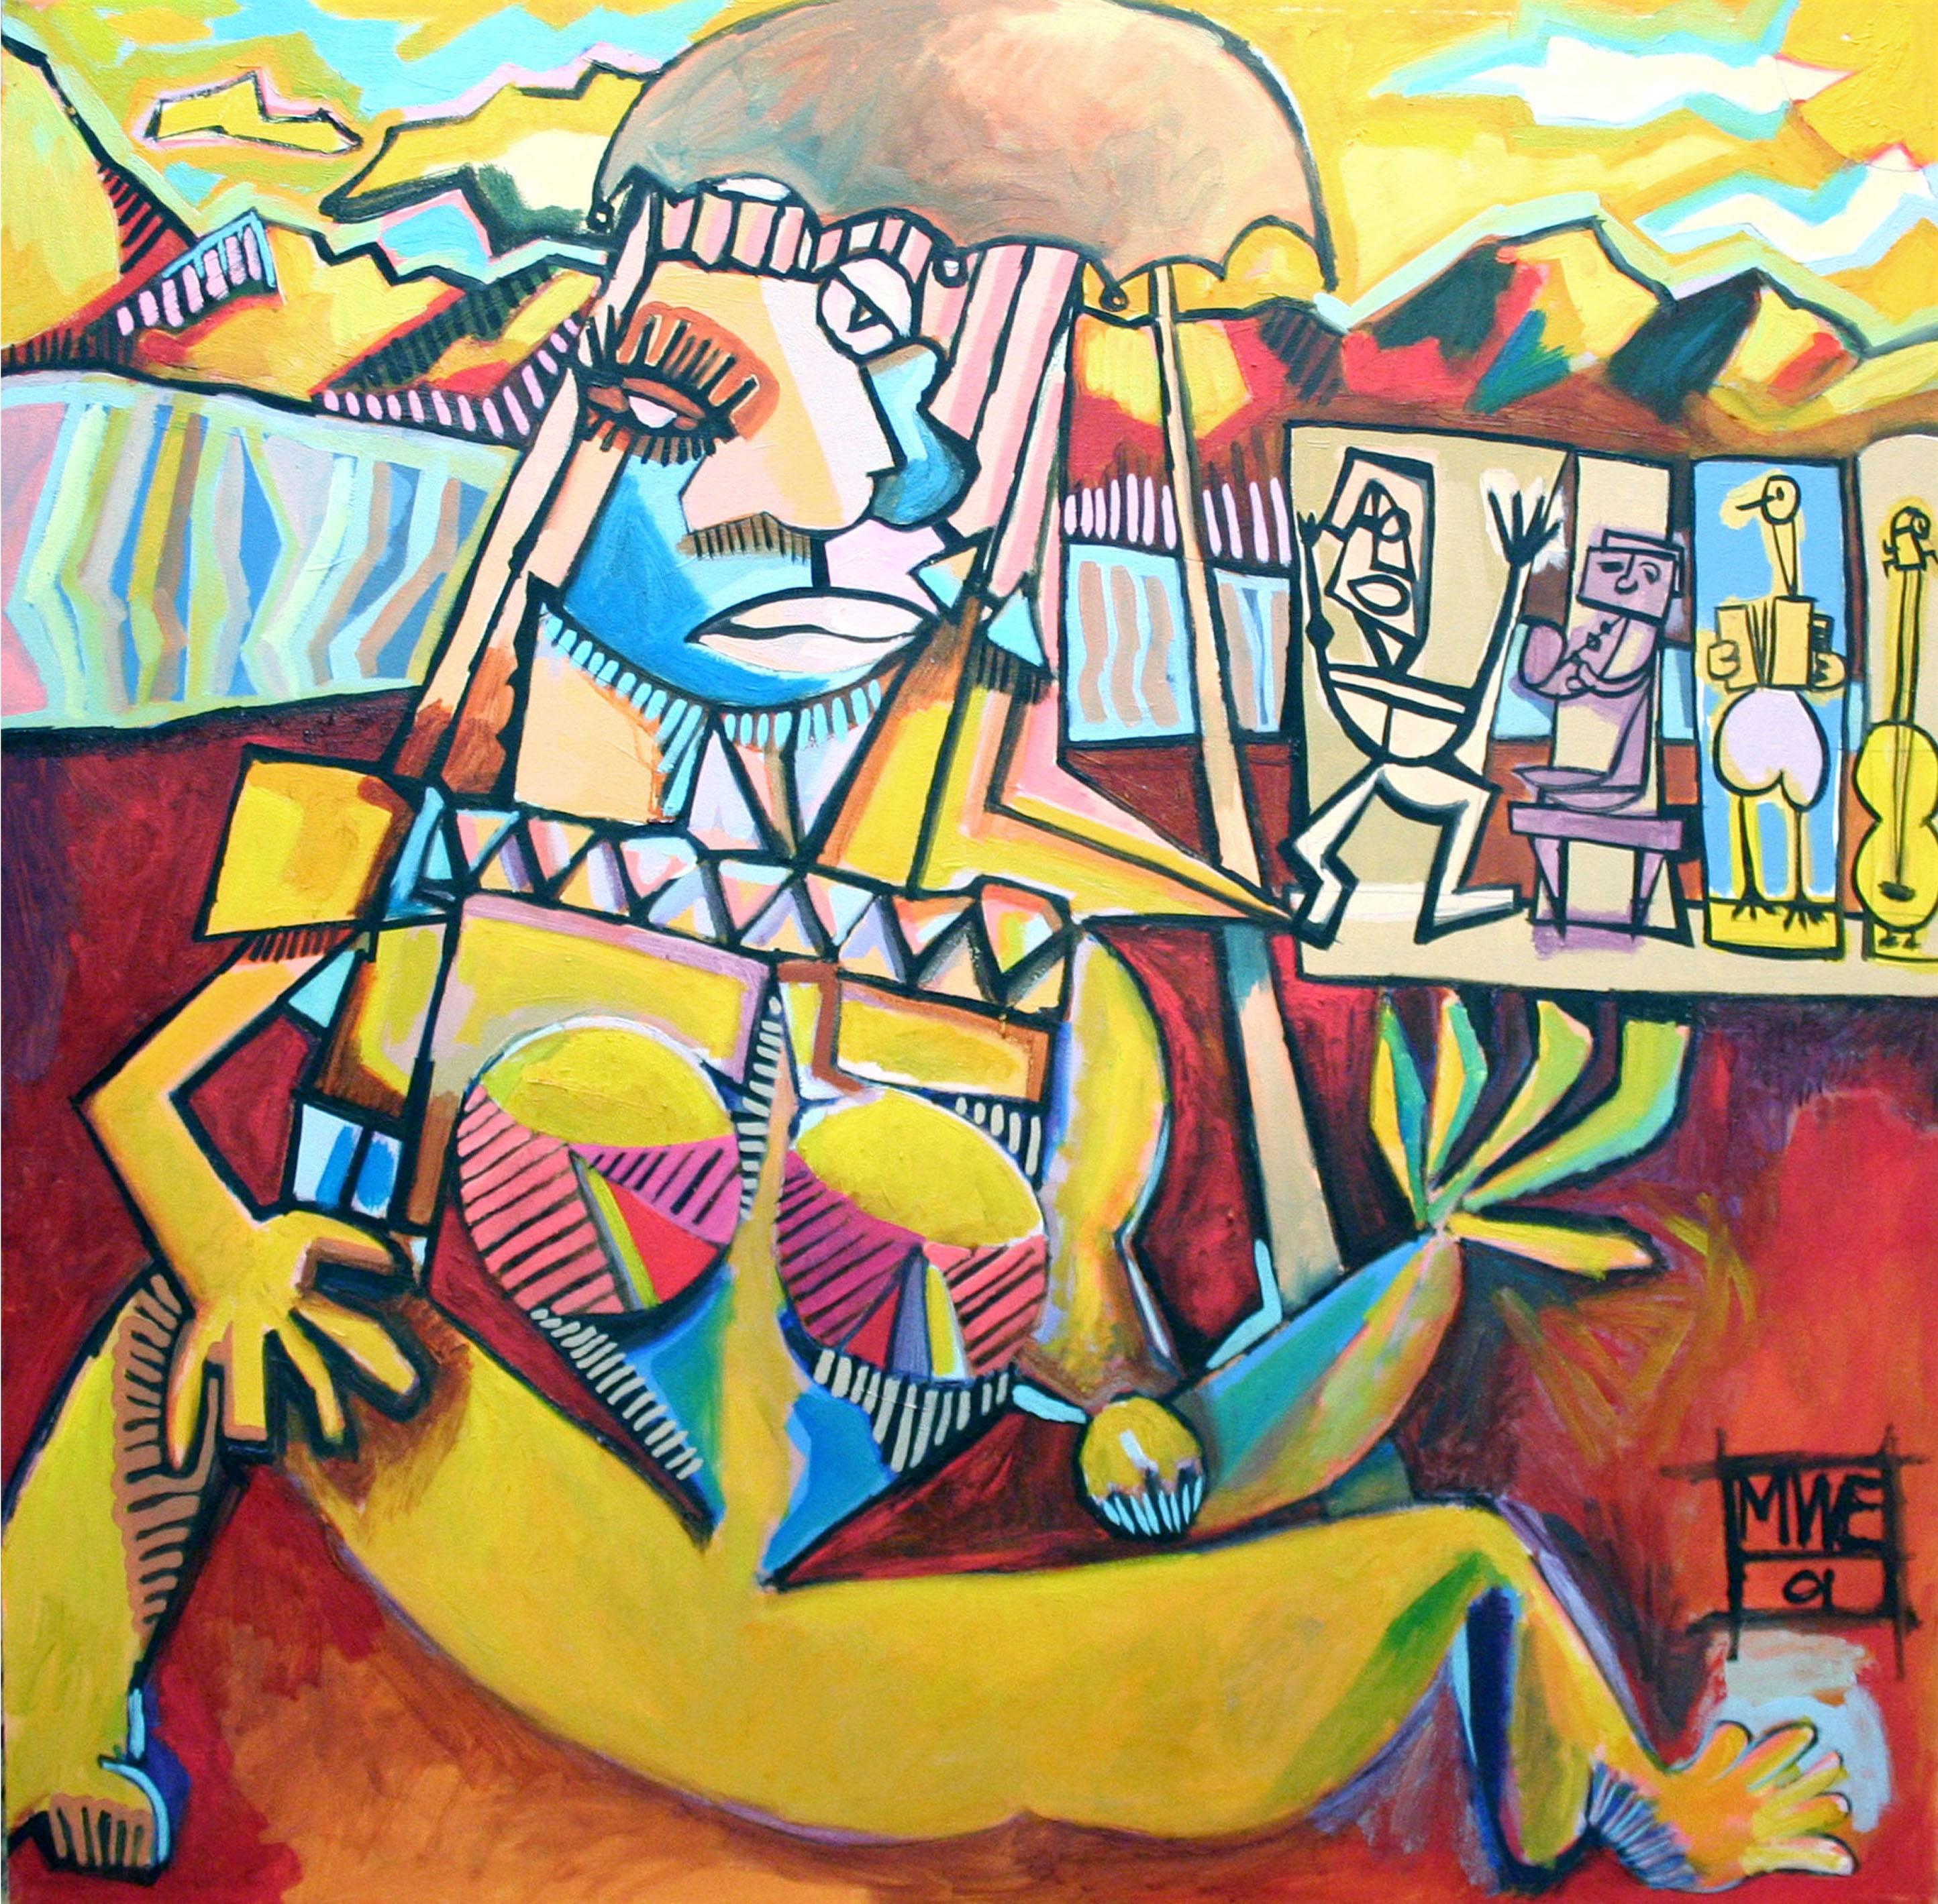 Woman With Air Guitar and Musicians Figurative Abstract 